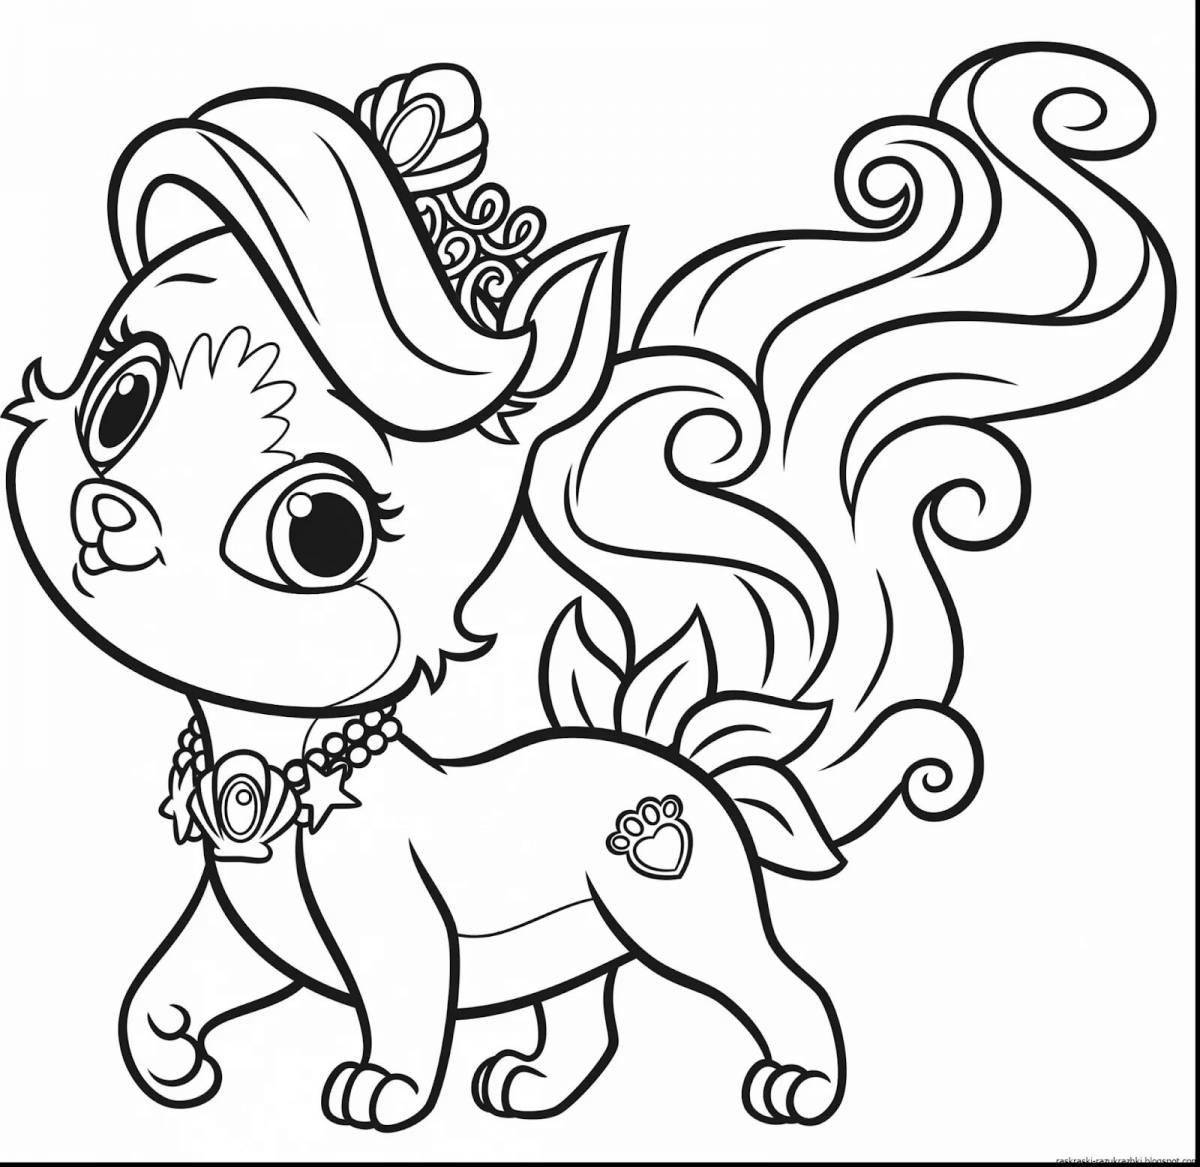 Amazing coloring pages for girls animals cute 9 years old